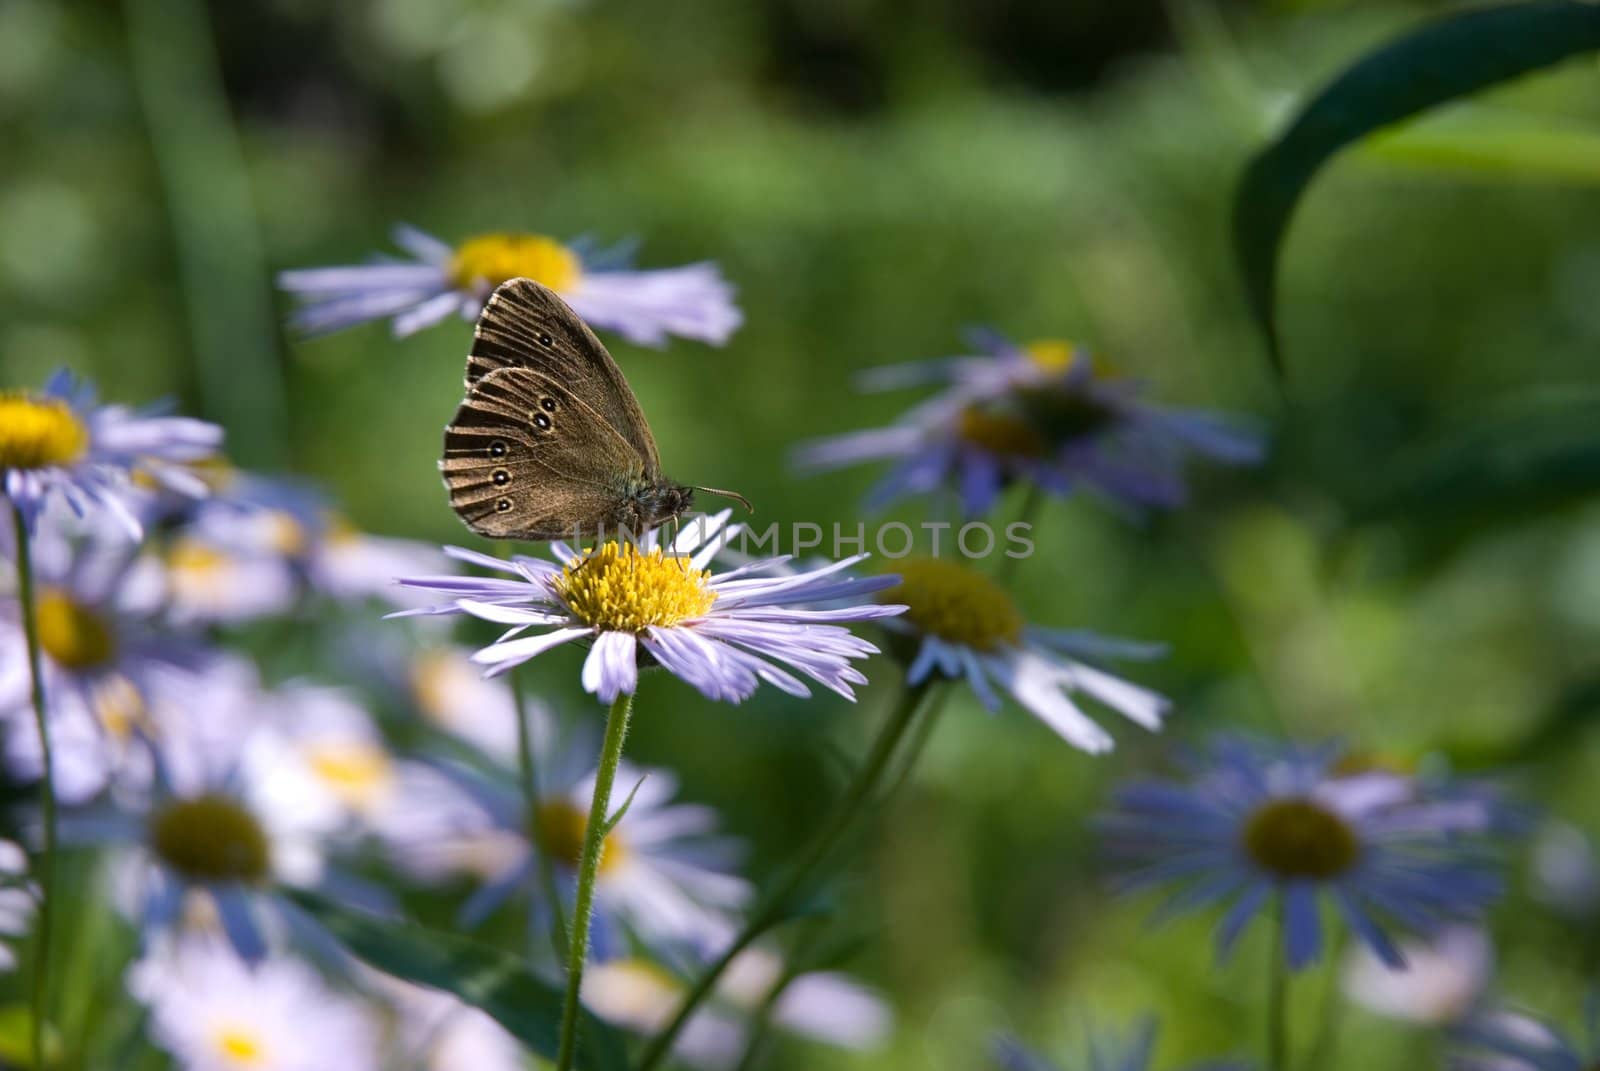 Wonderful butterfly sitting on a blue camomile